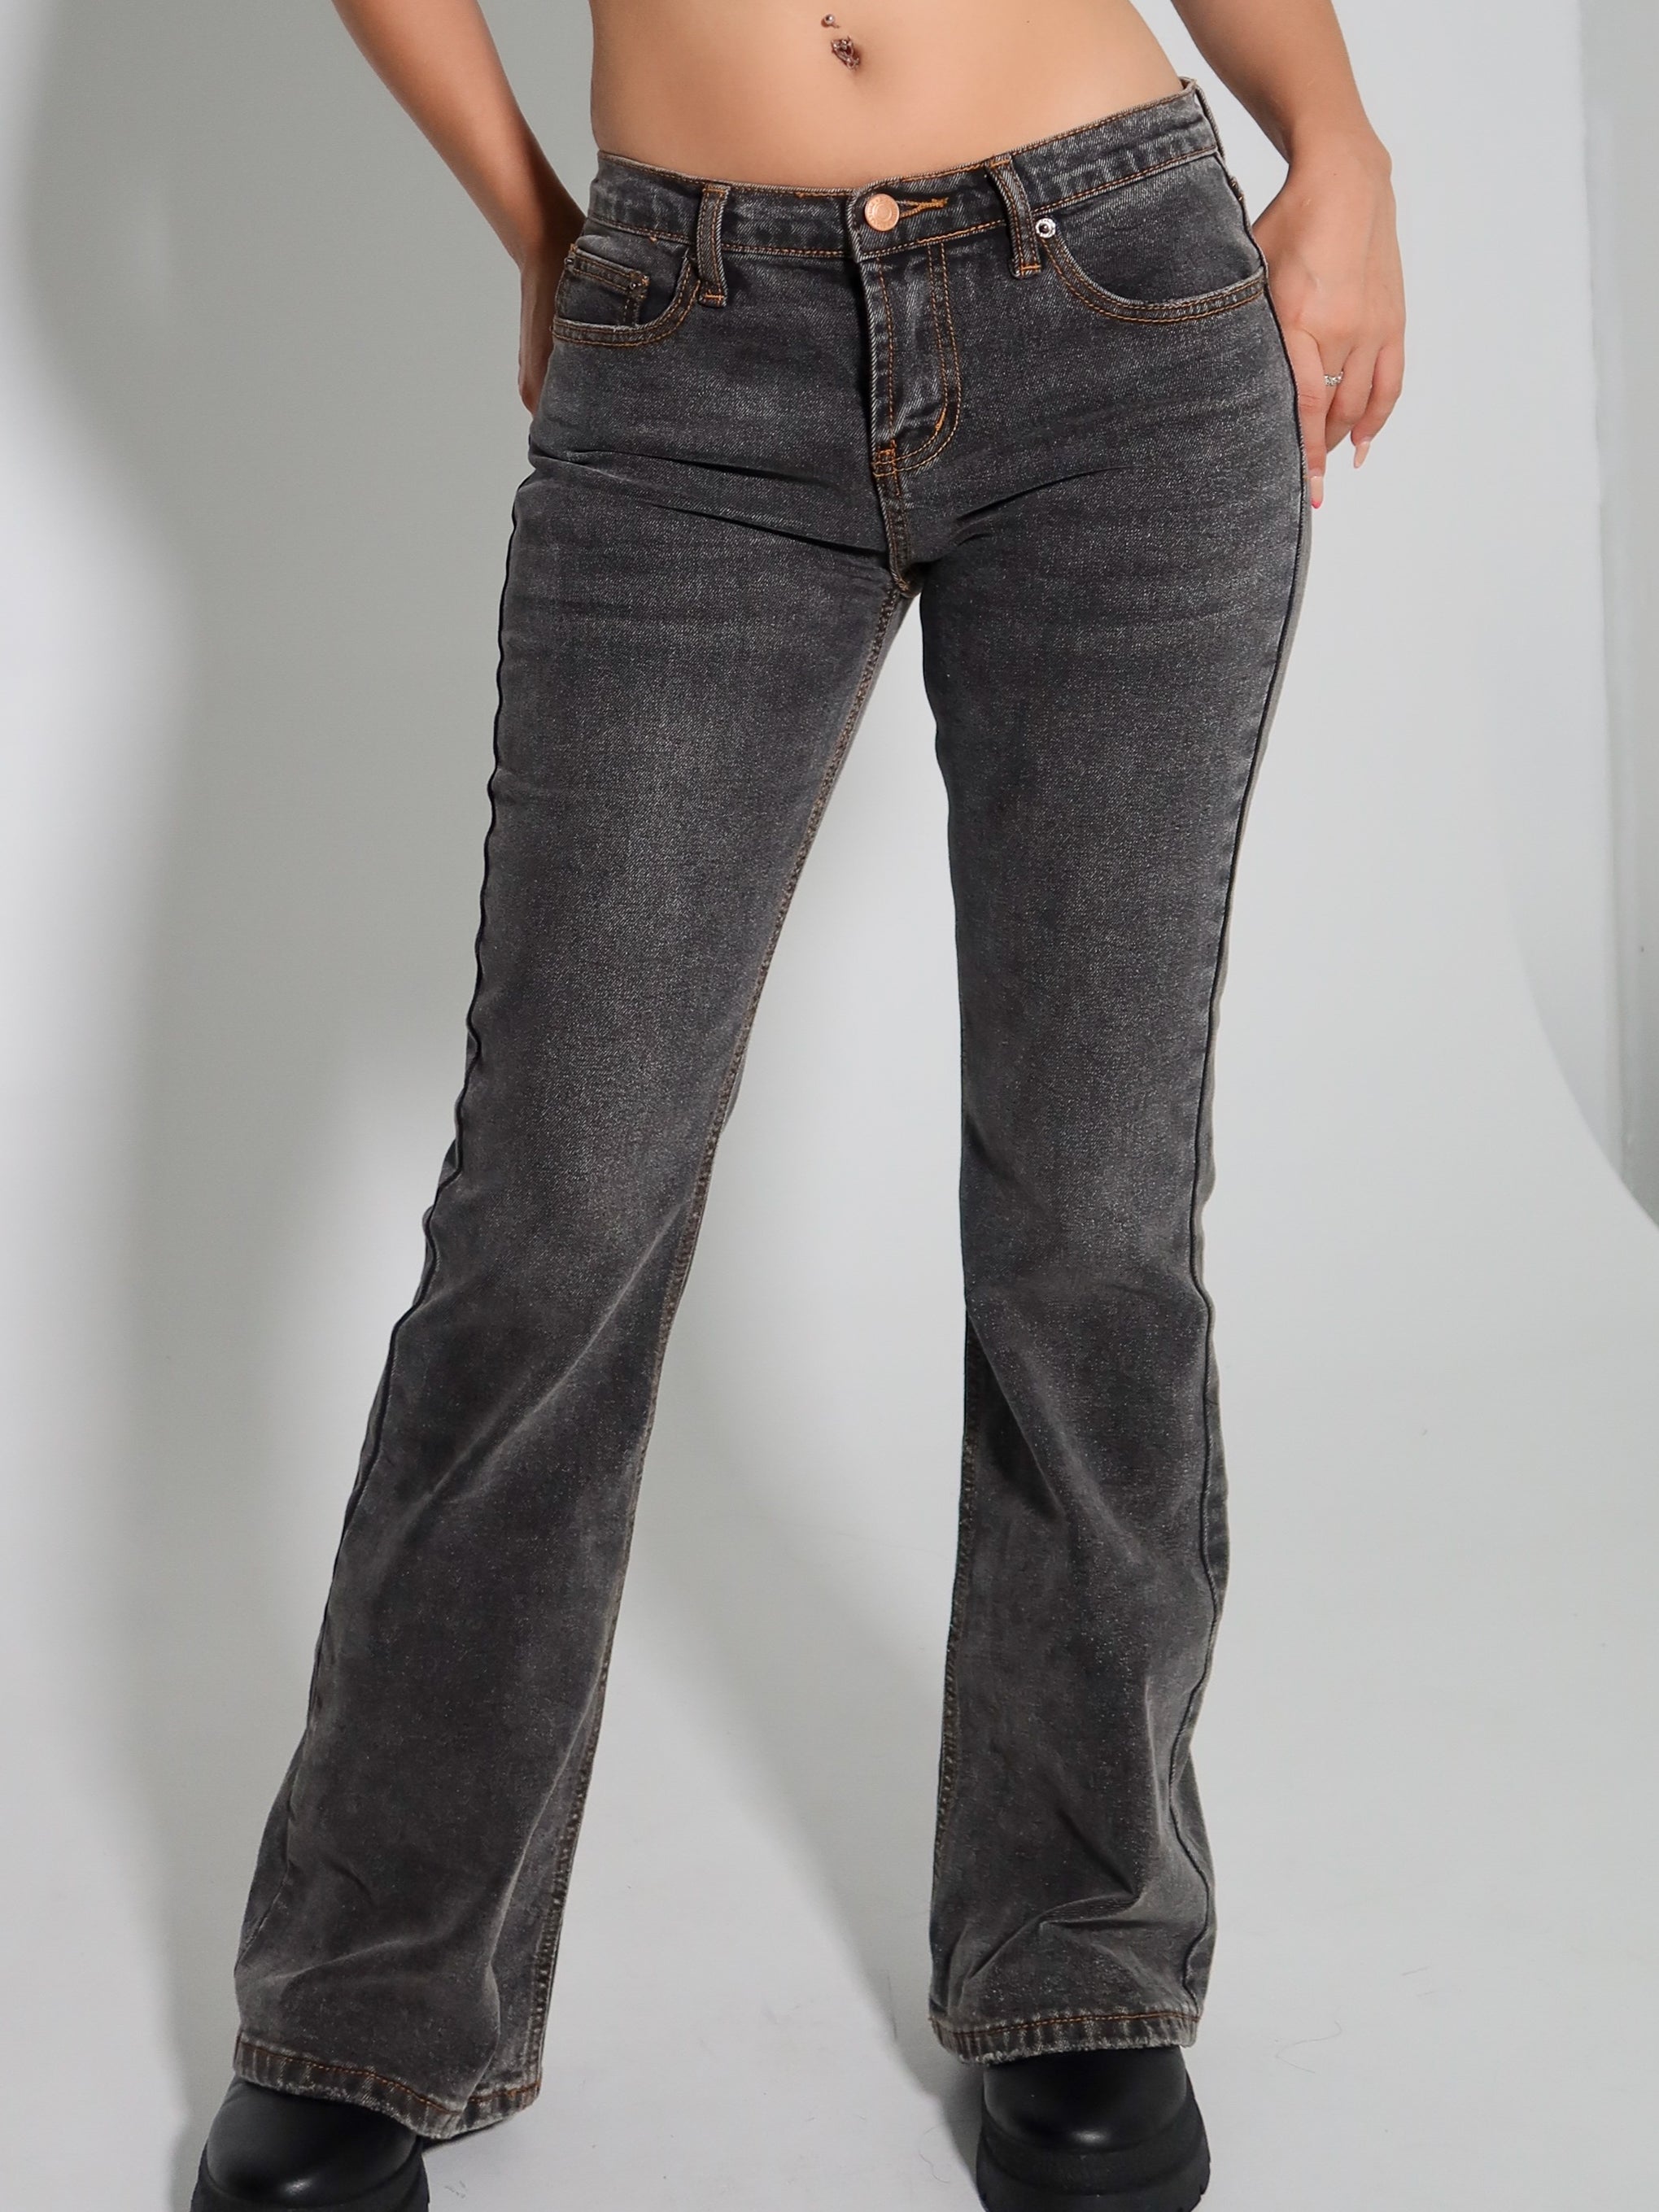 Christine Flare Jeans (Washed Black) - Laura's Boutique, Inc